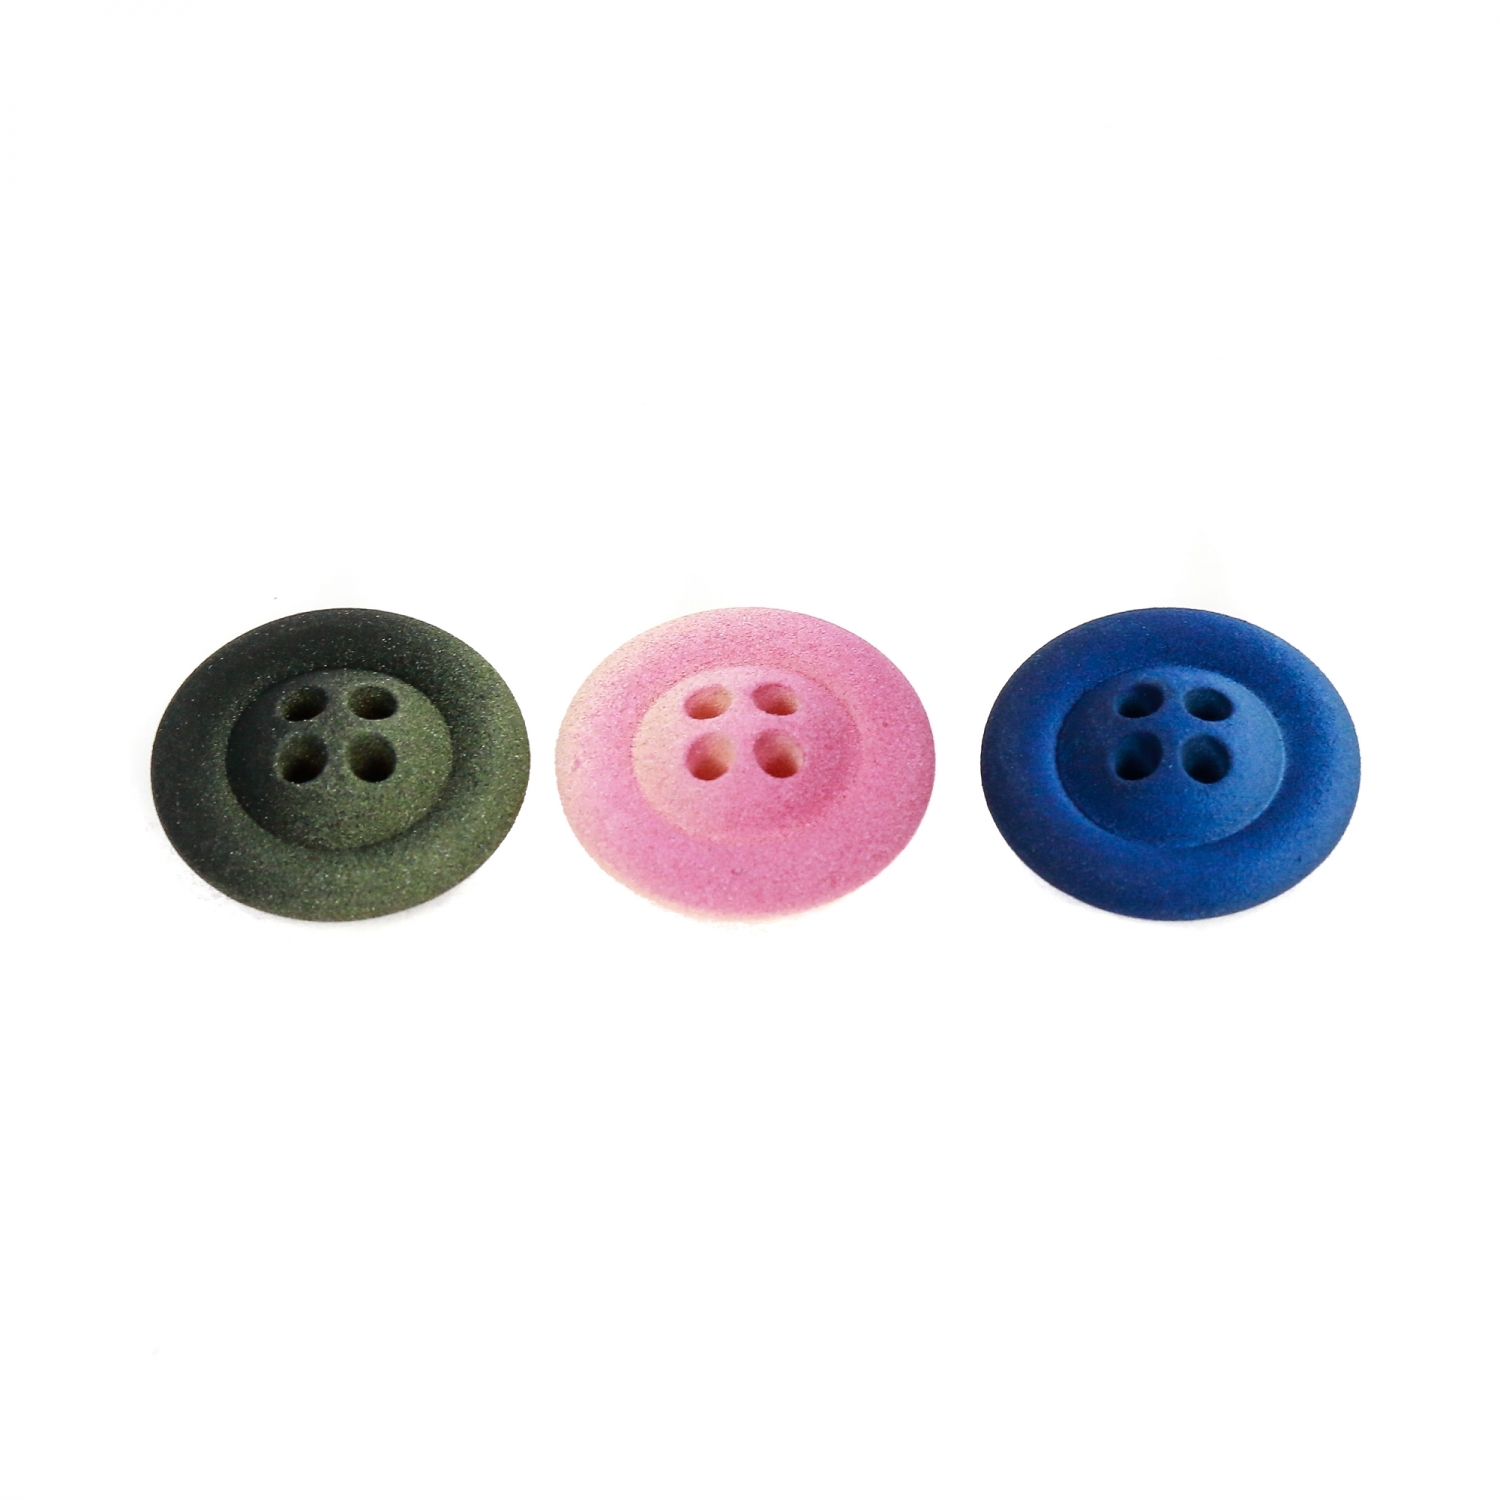 4 Holes Buttons, 15 mm  (50 pcs/pack)Code: 27393/24